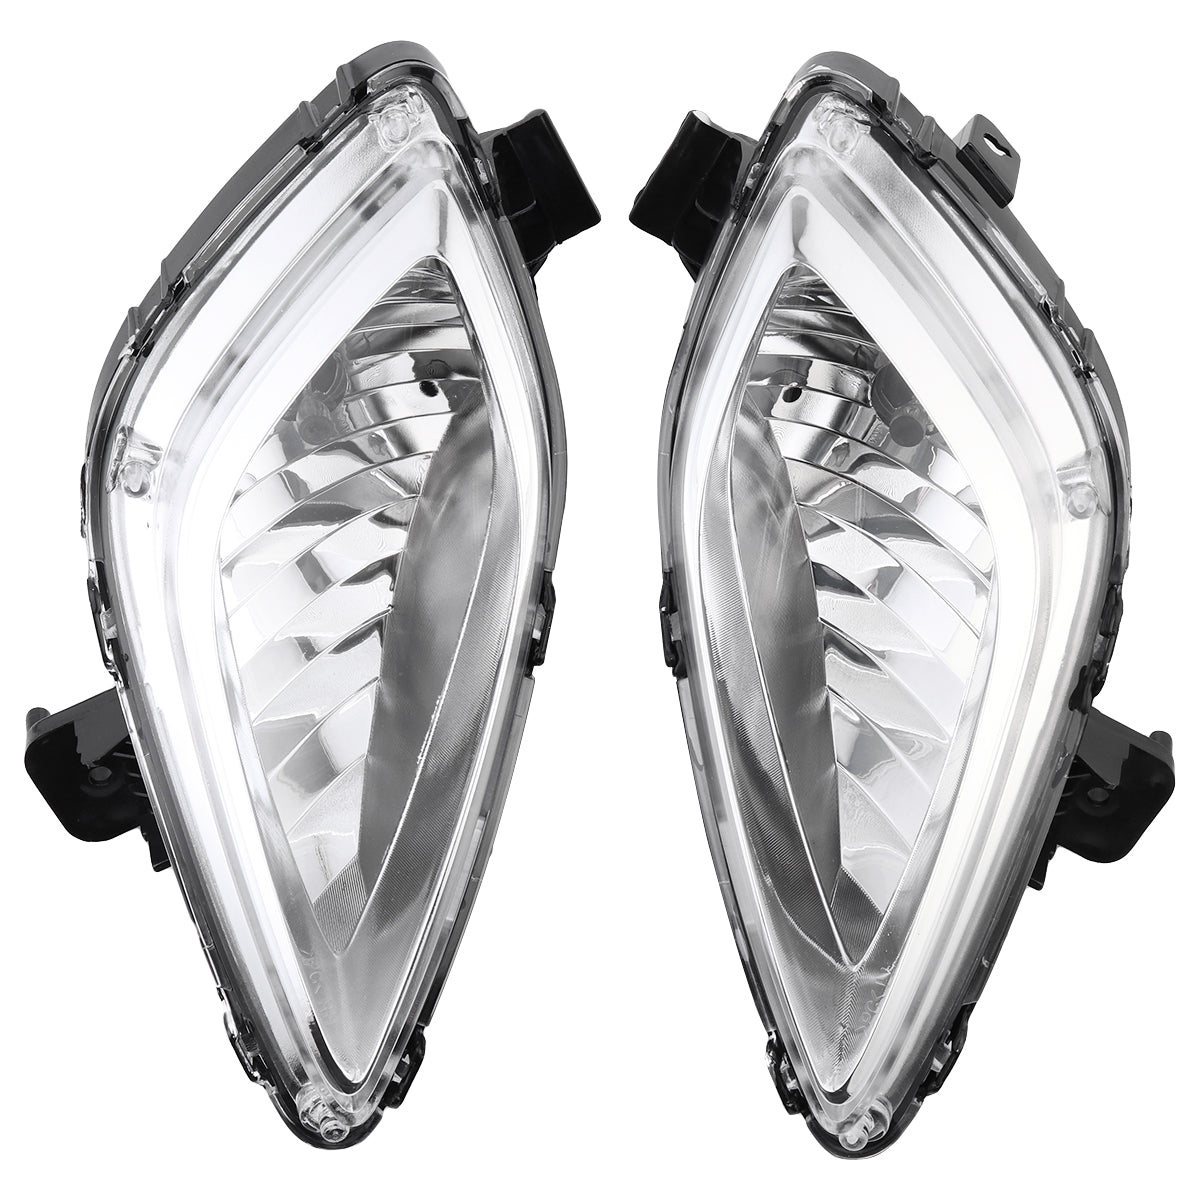 Lavender A Pair Left Right Clear Front Bumper Car Fog Lights Lamps For Hyundai Elantra 2011-2013